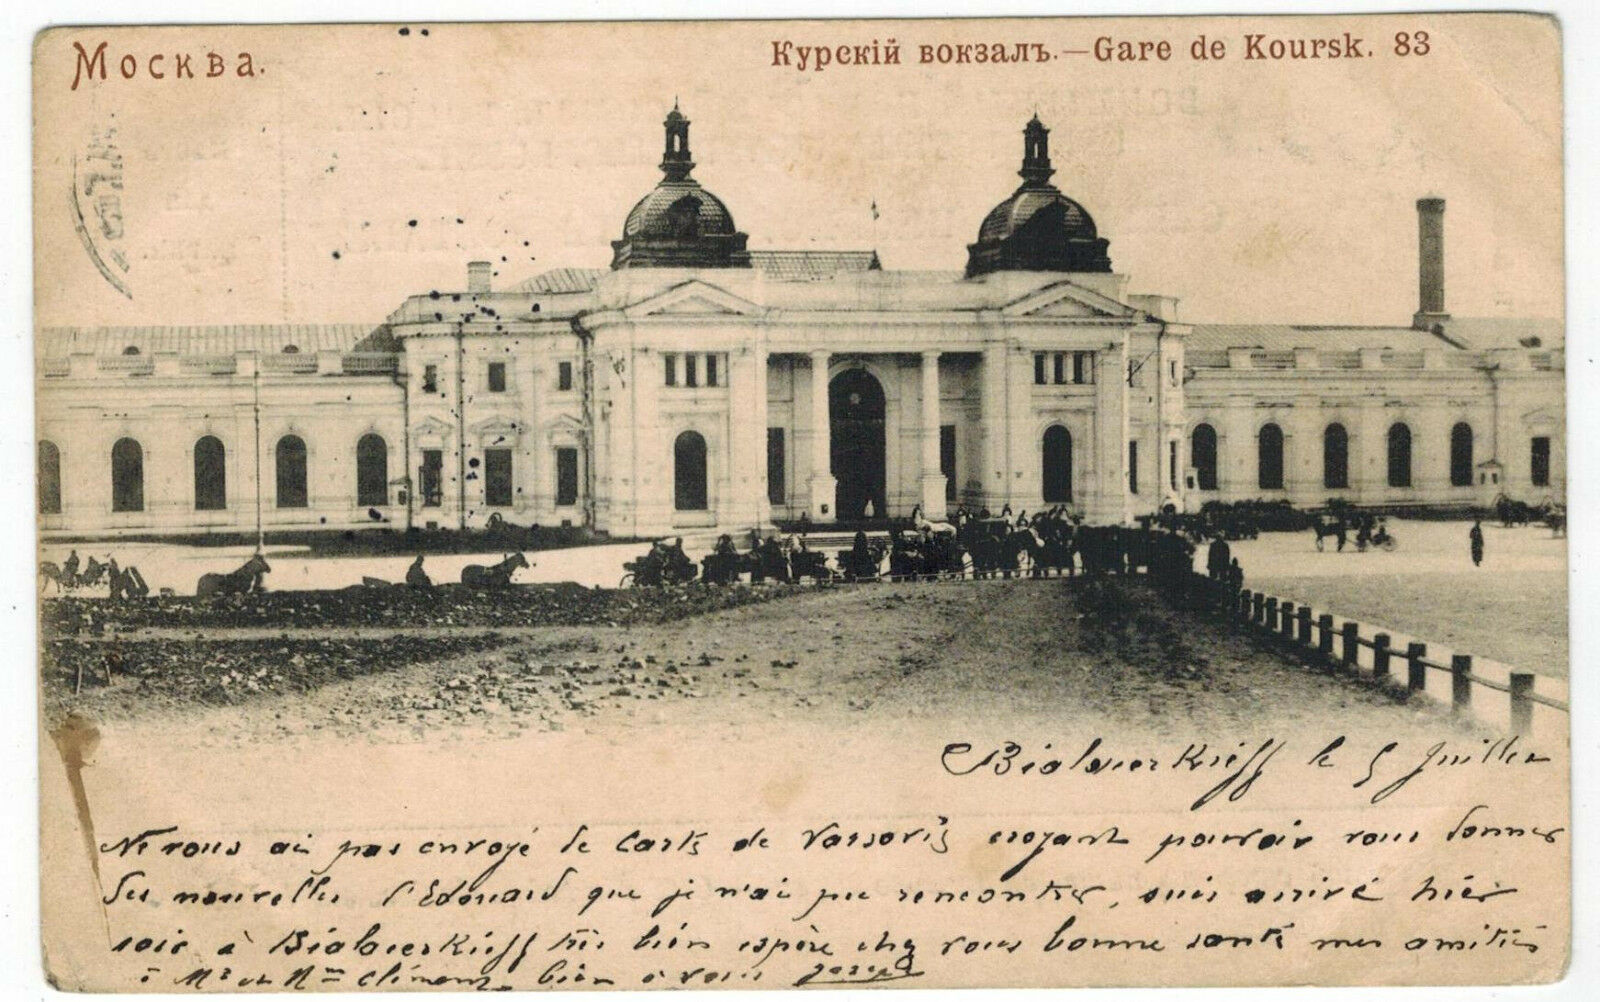 Kursk Railway Station in Moscow, Russia, 1904 to France